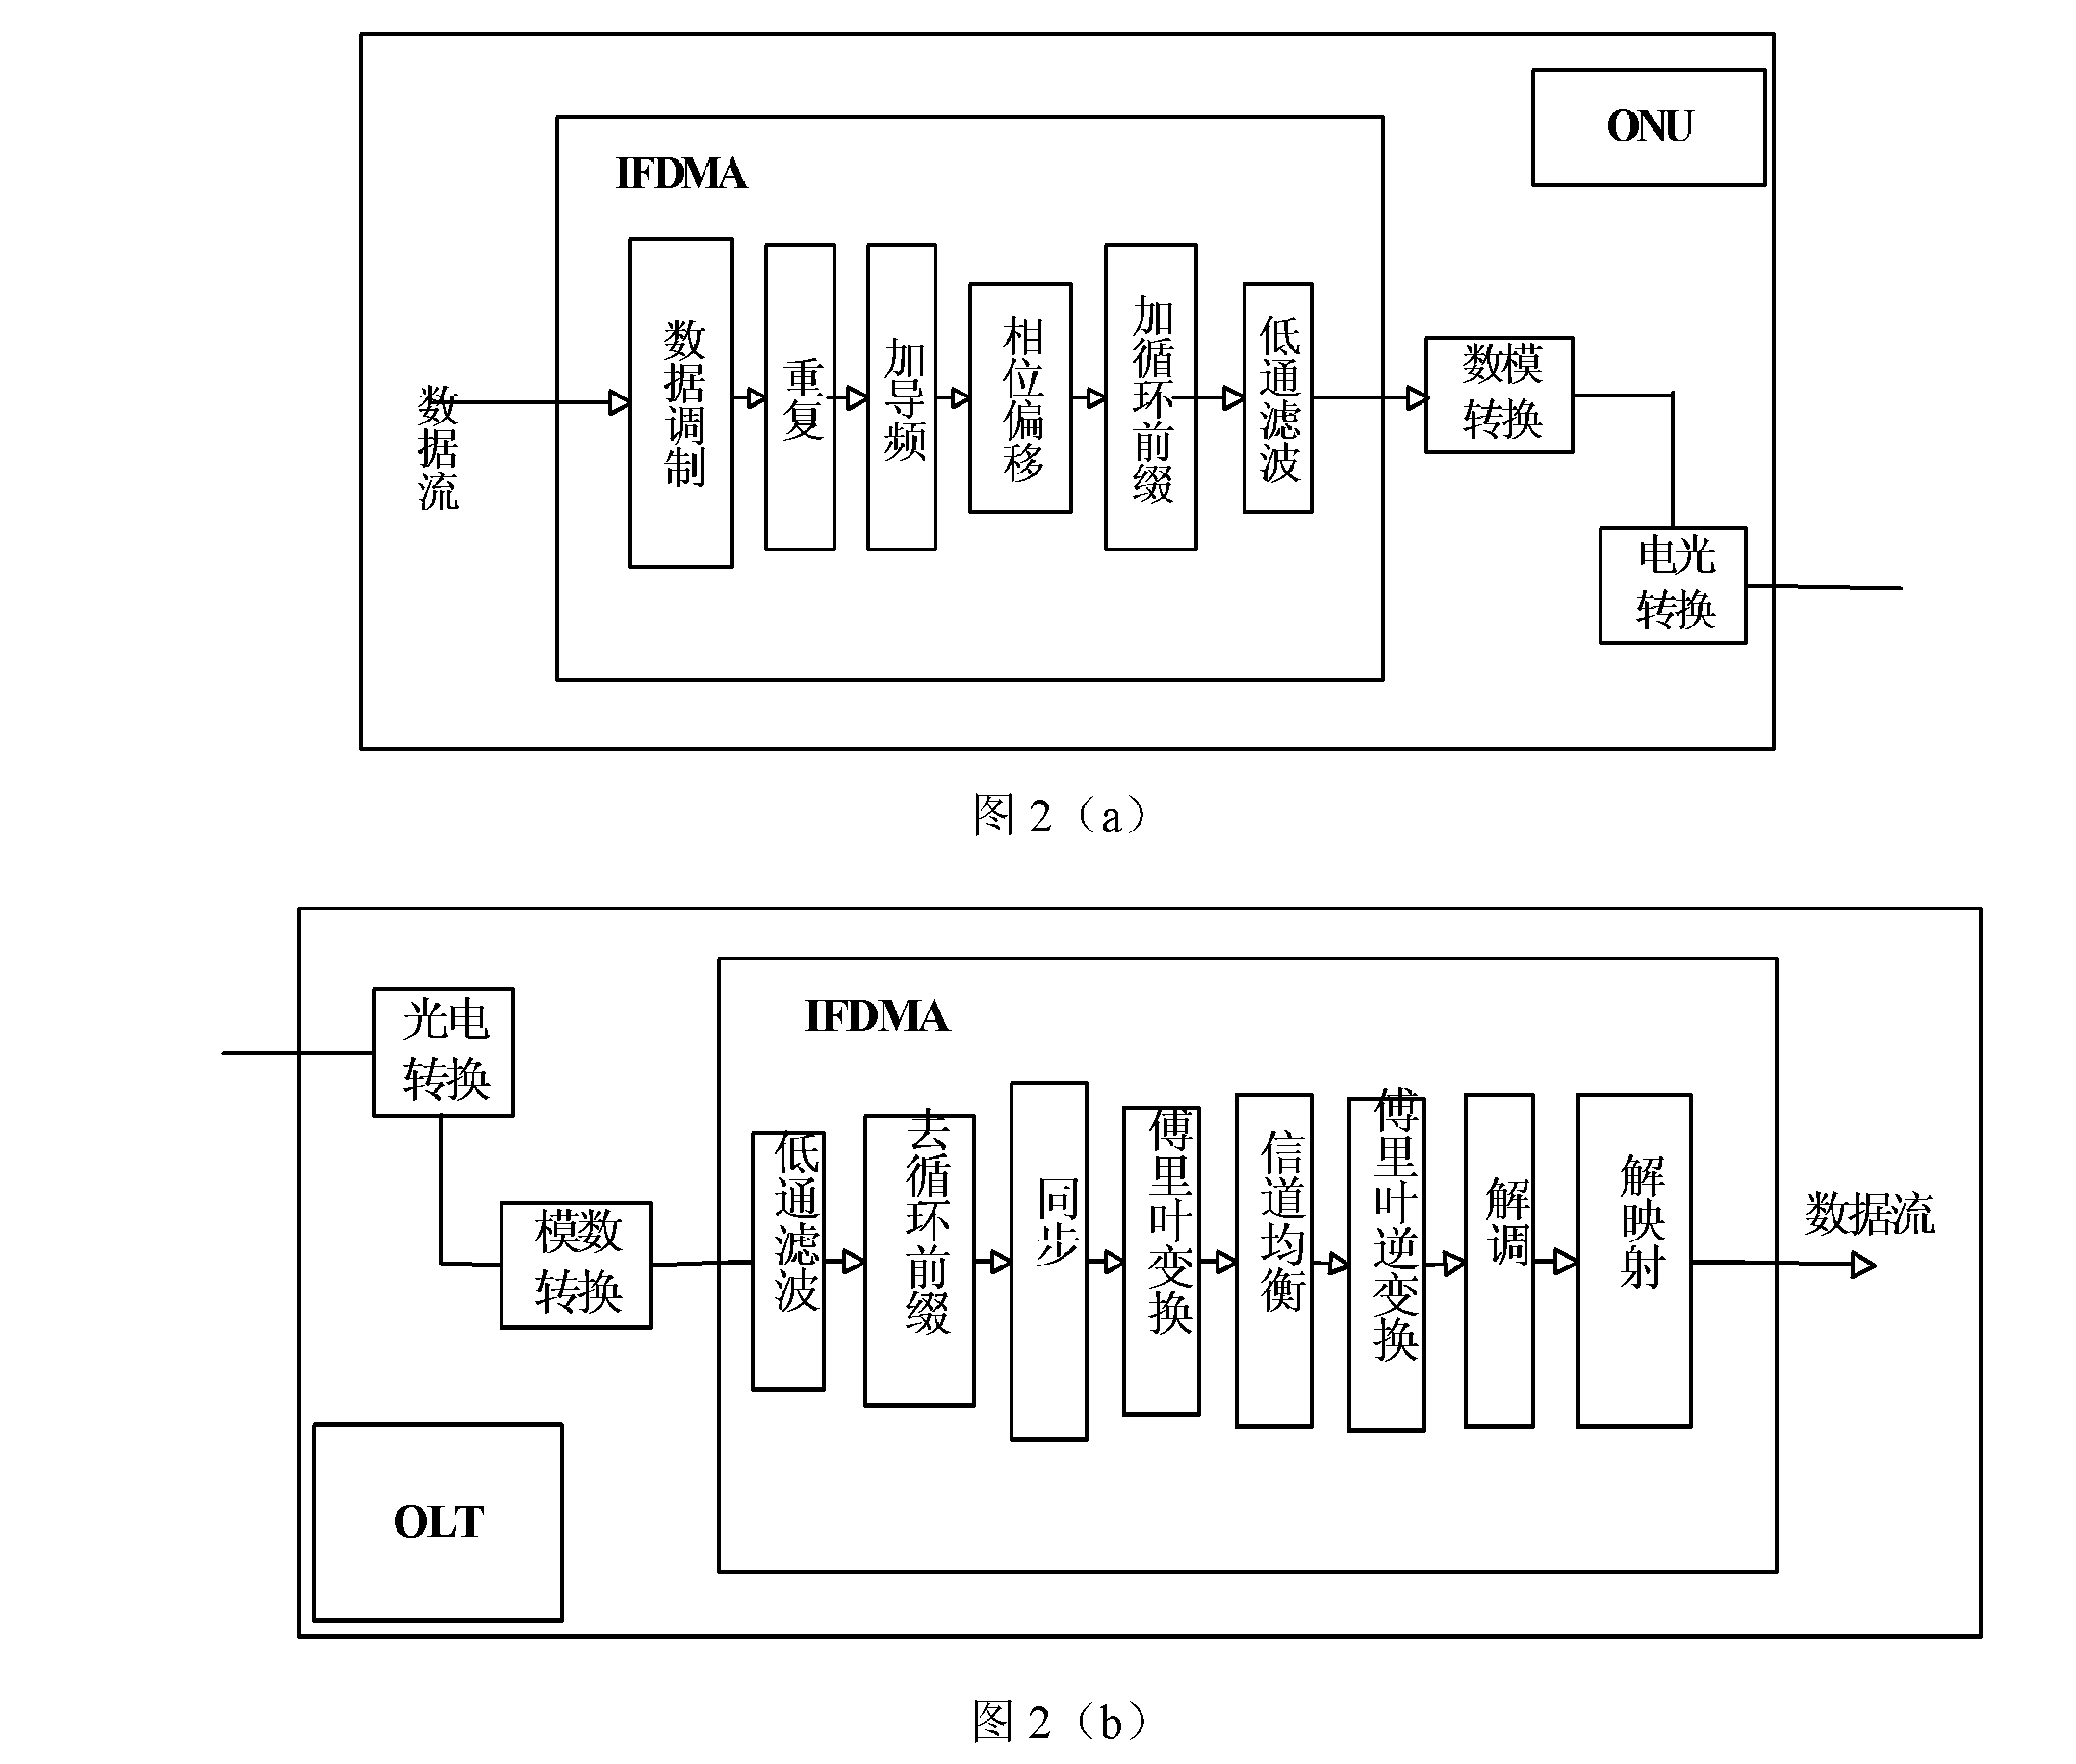 A Passive Optical Network Uplink Transmission System Based on Interleaved Frequency Division Multiple Access